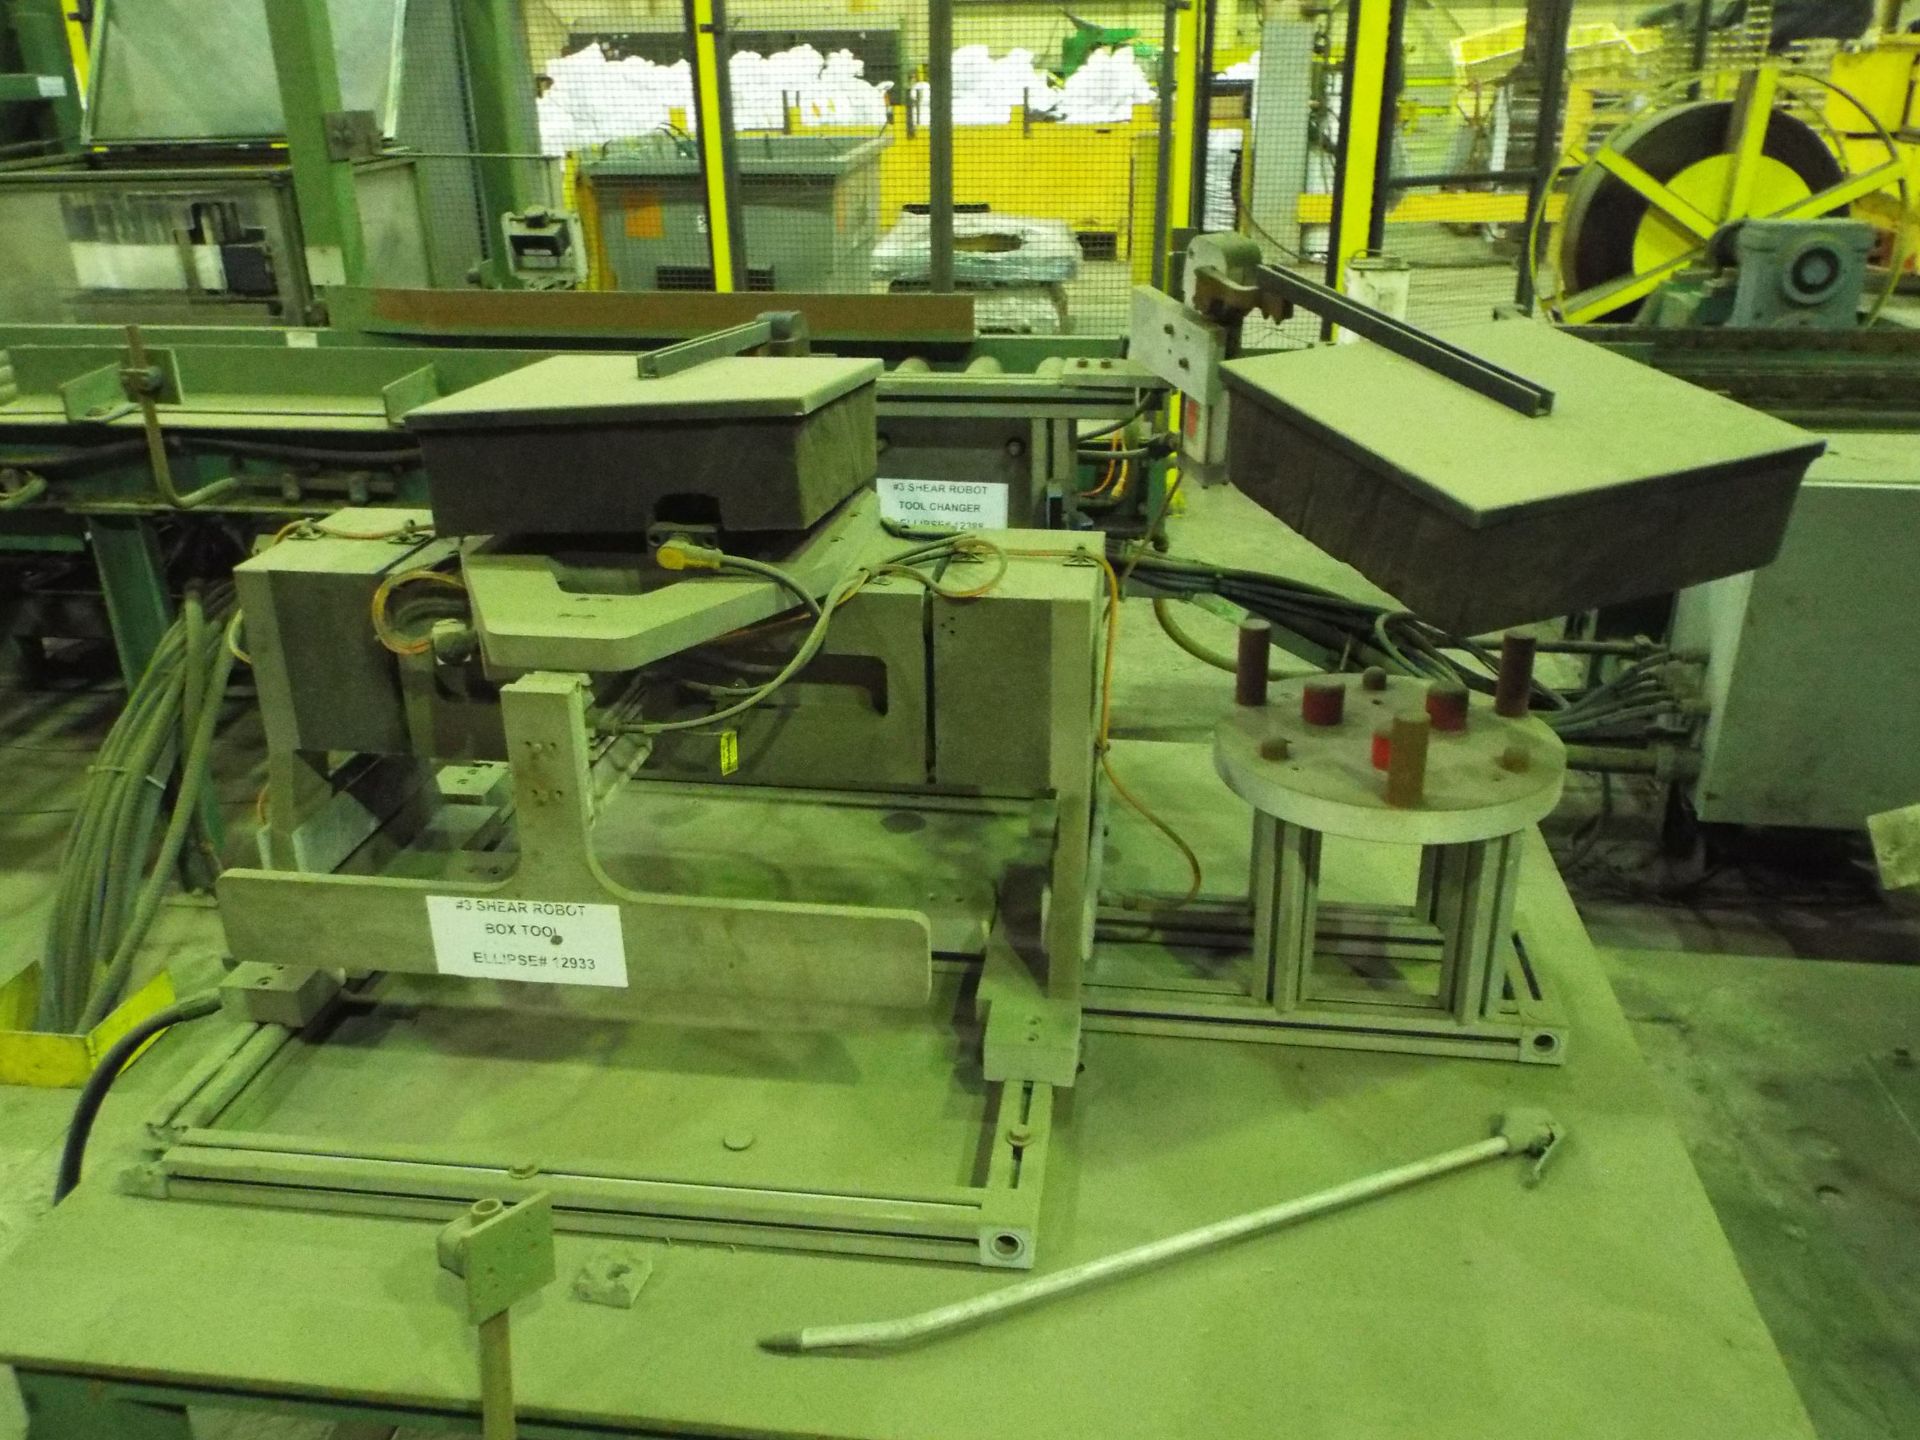 LOT/ FANUC M-900iA 6 AXIS PICK AND PLACE ROBOT WITH DRUM PICKING HEAD, ROBOT TOOL CHANGE STATION, - Image 4 of 8